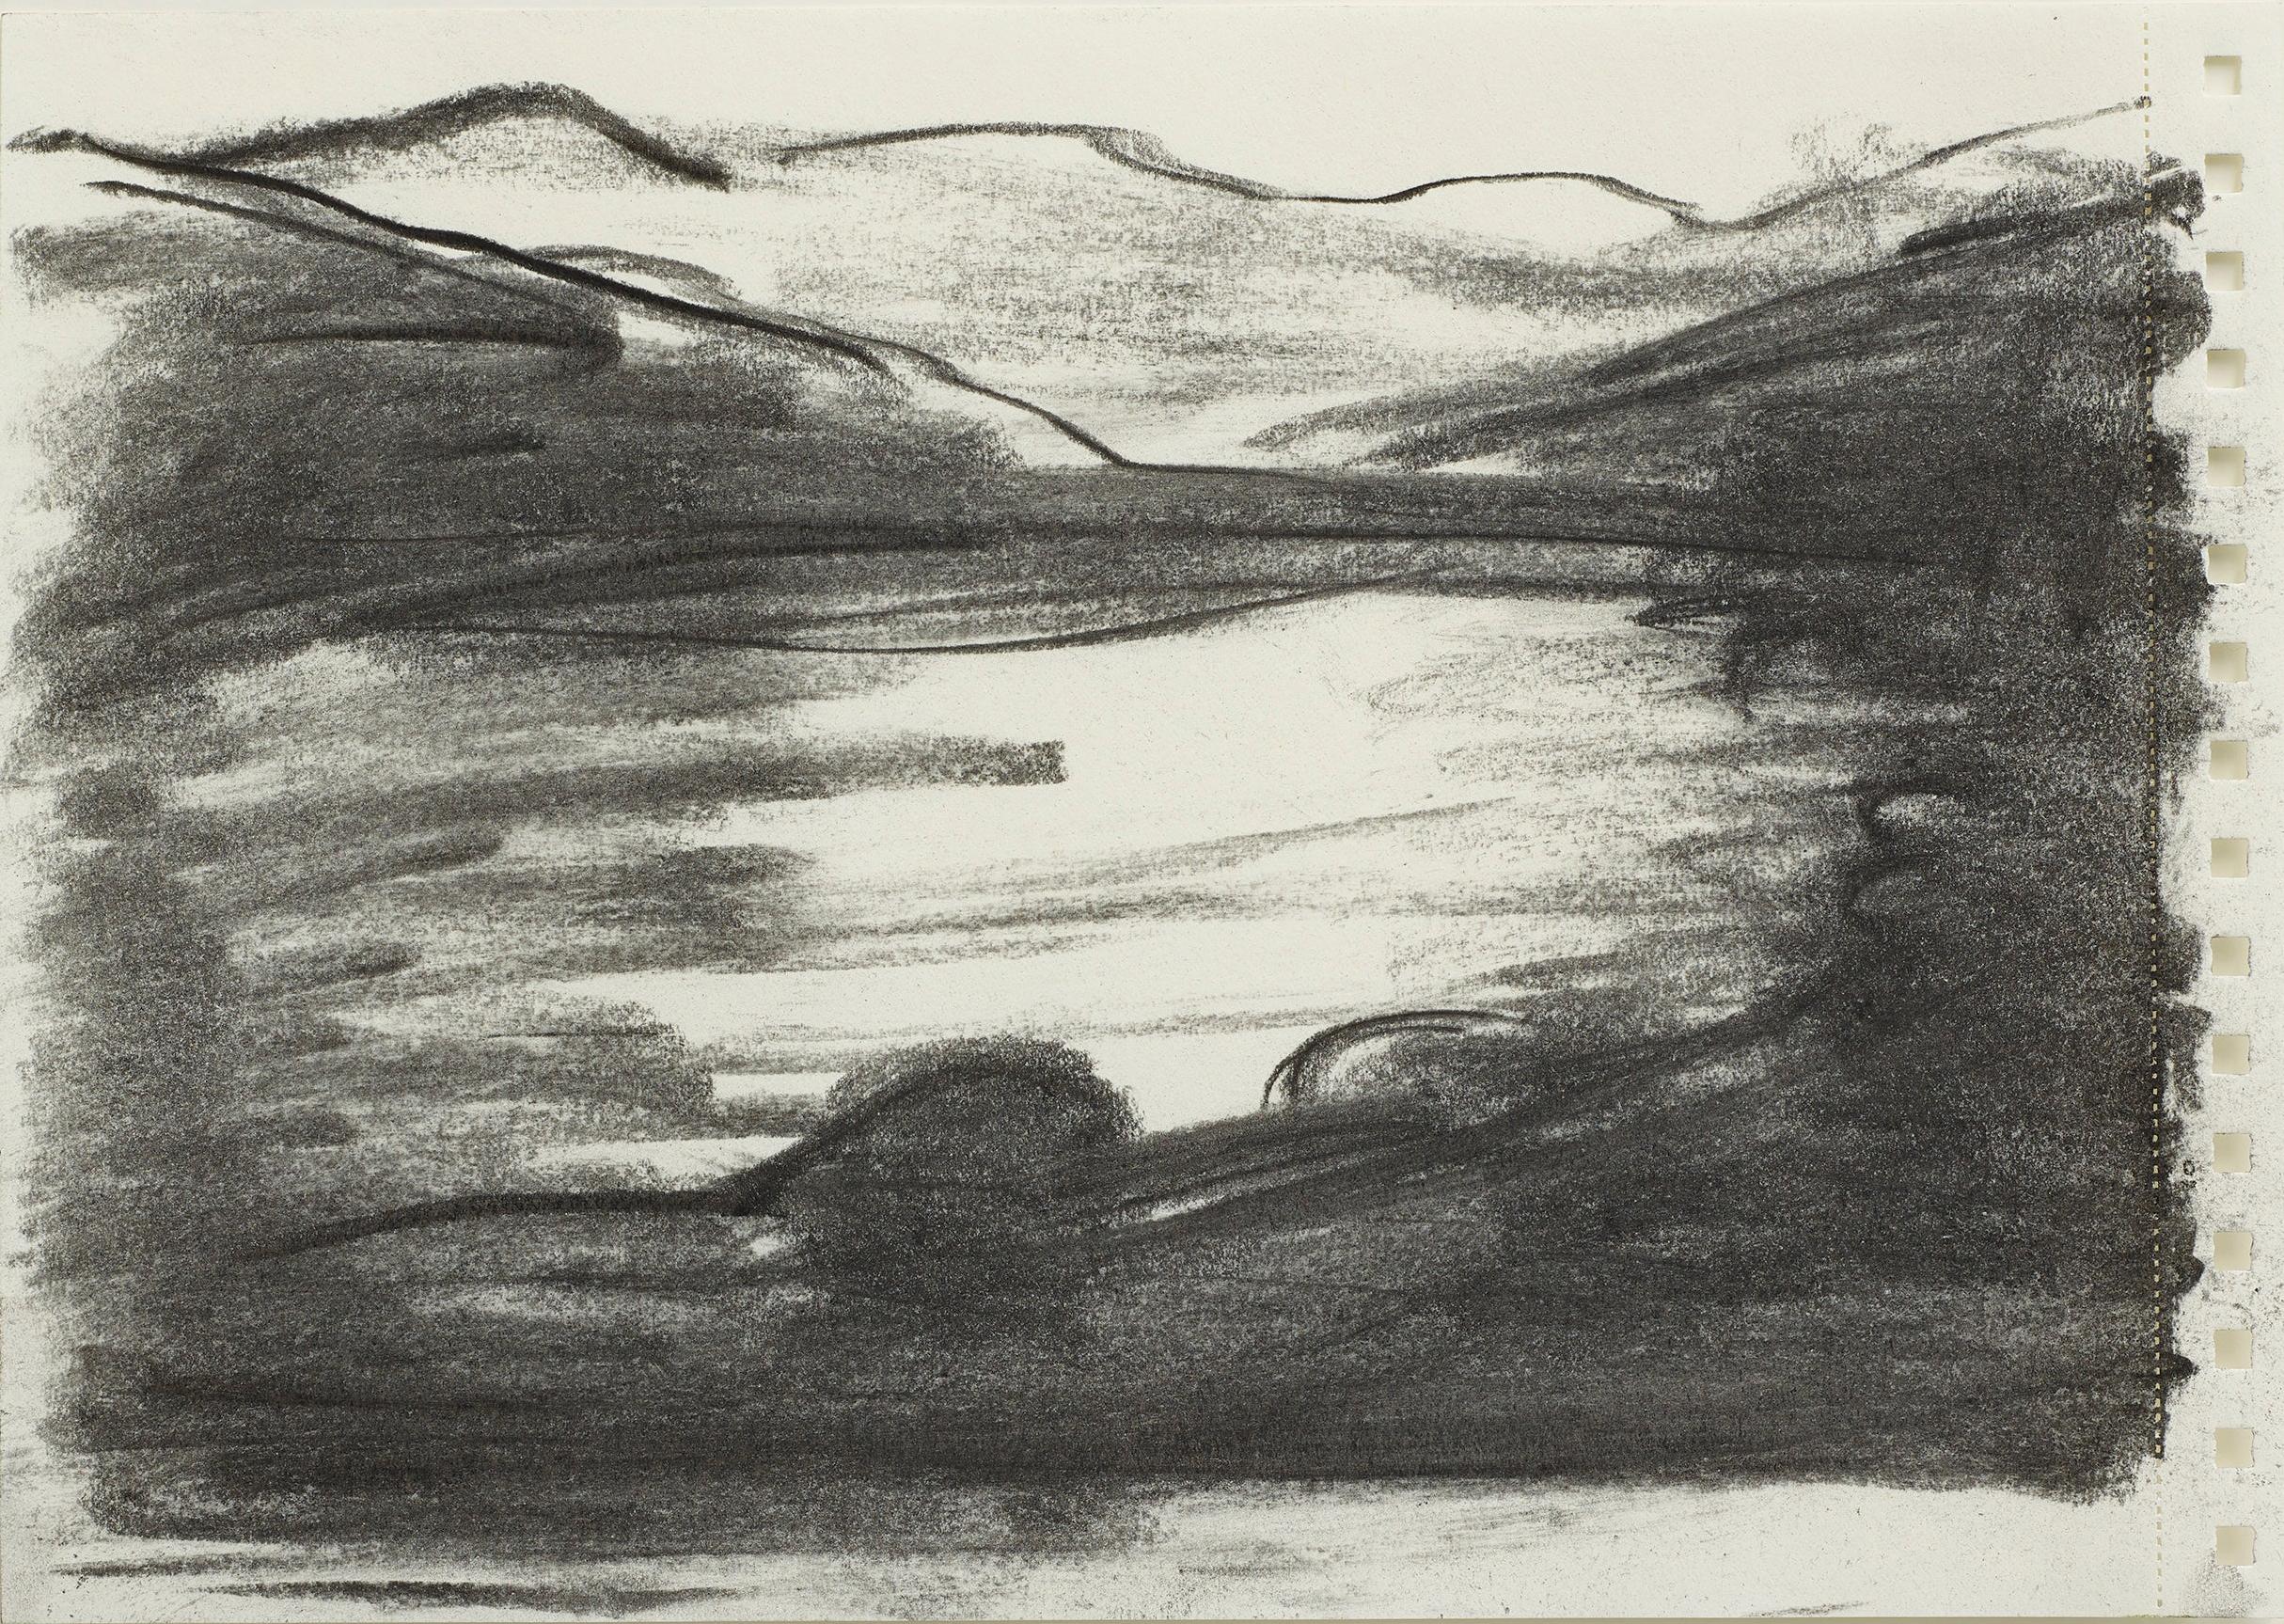 "Untitled", charcoal drawing, expressionist style, landscape, figuration